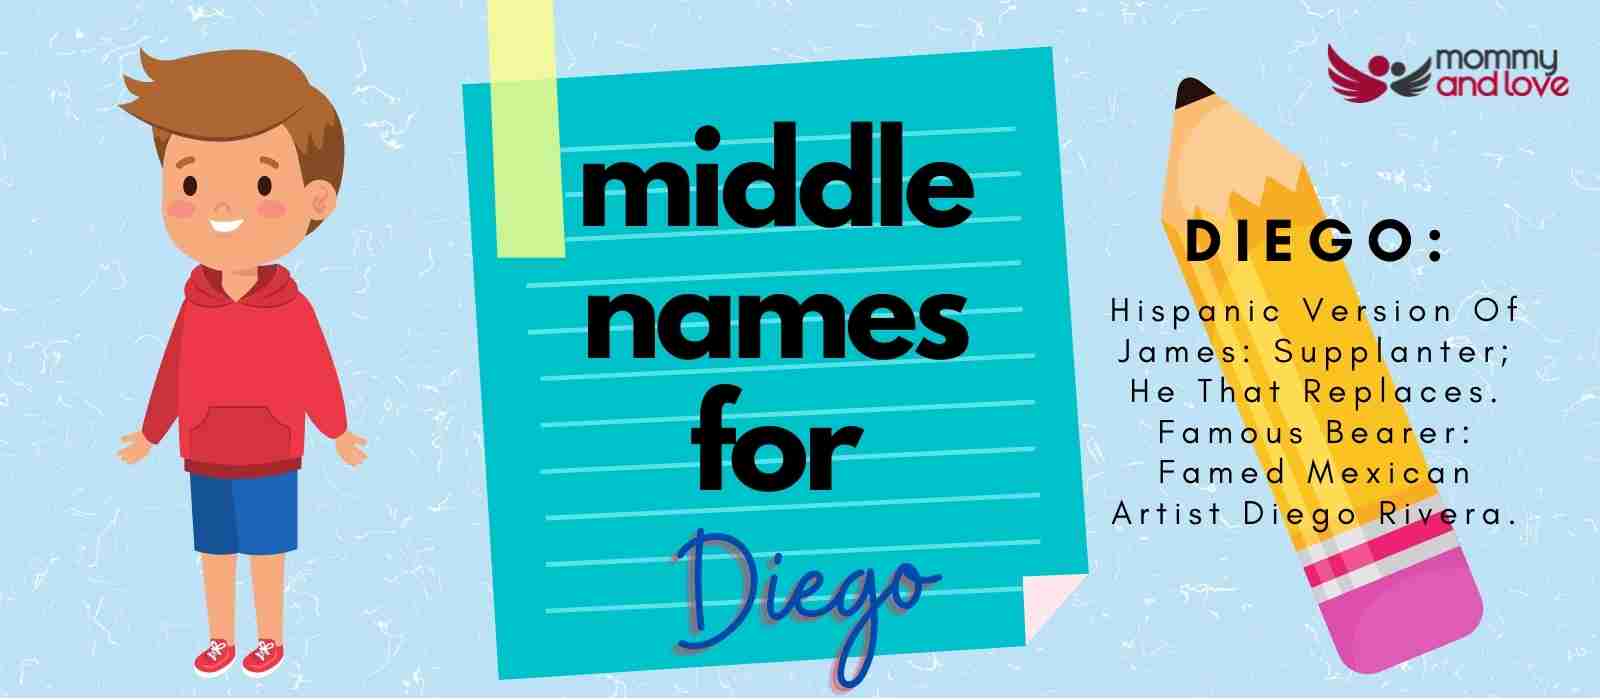 Middle Names for Diego